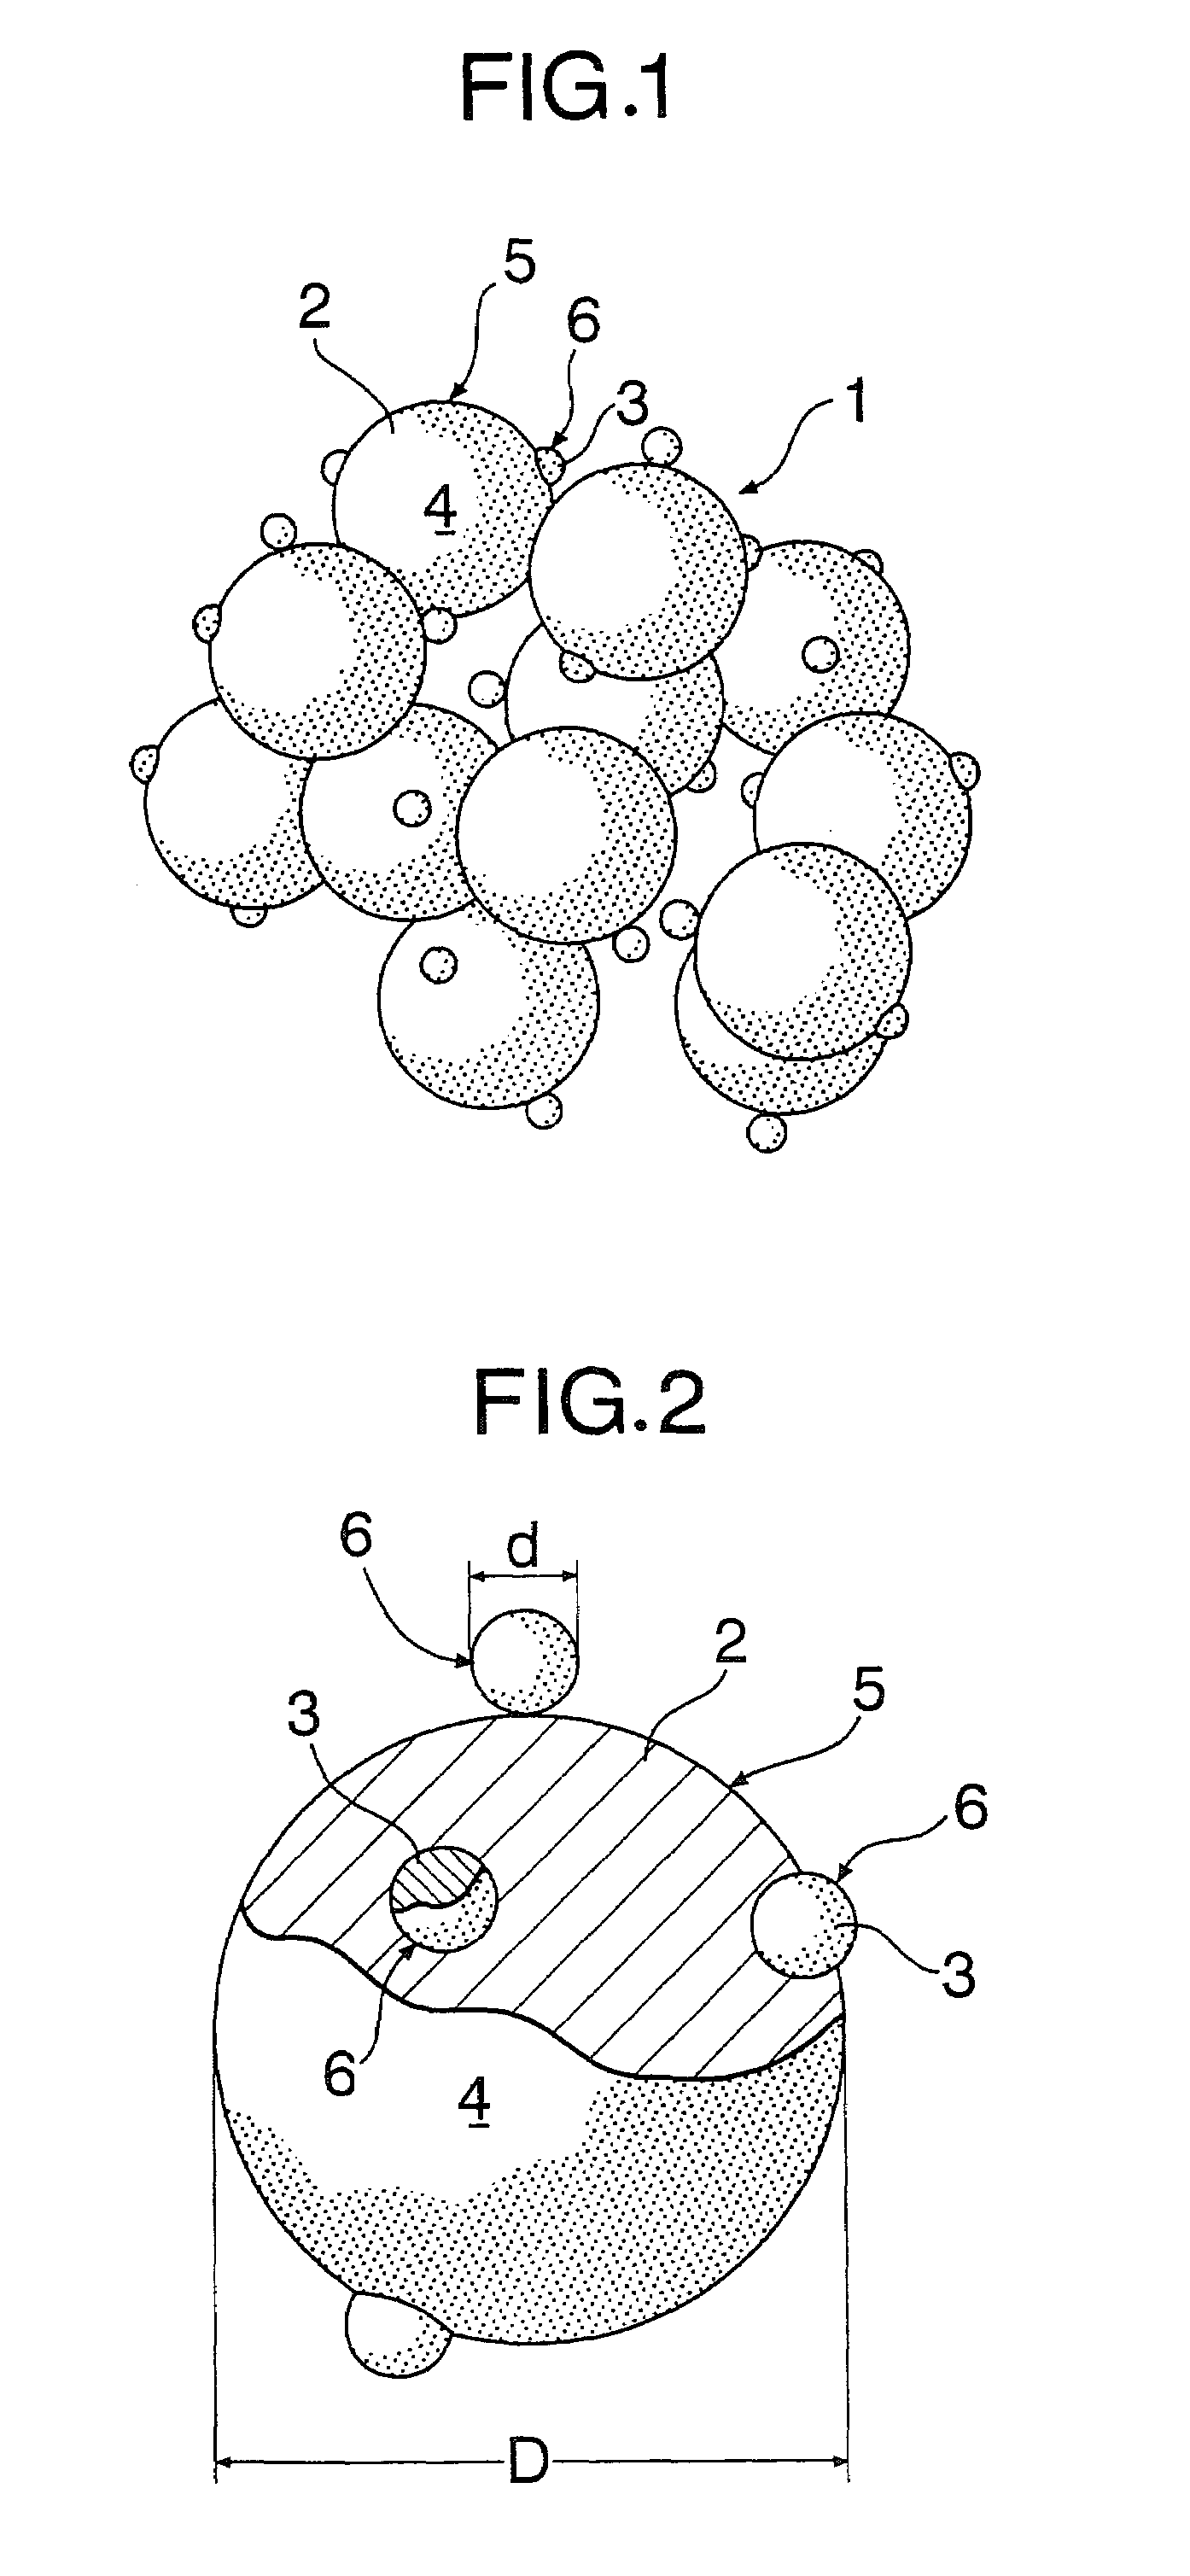 Hydrogen absorbing alloy powder and hydrogen storing tank for mounting in a vehicle